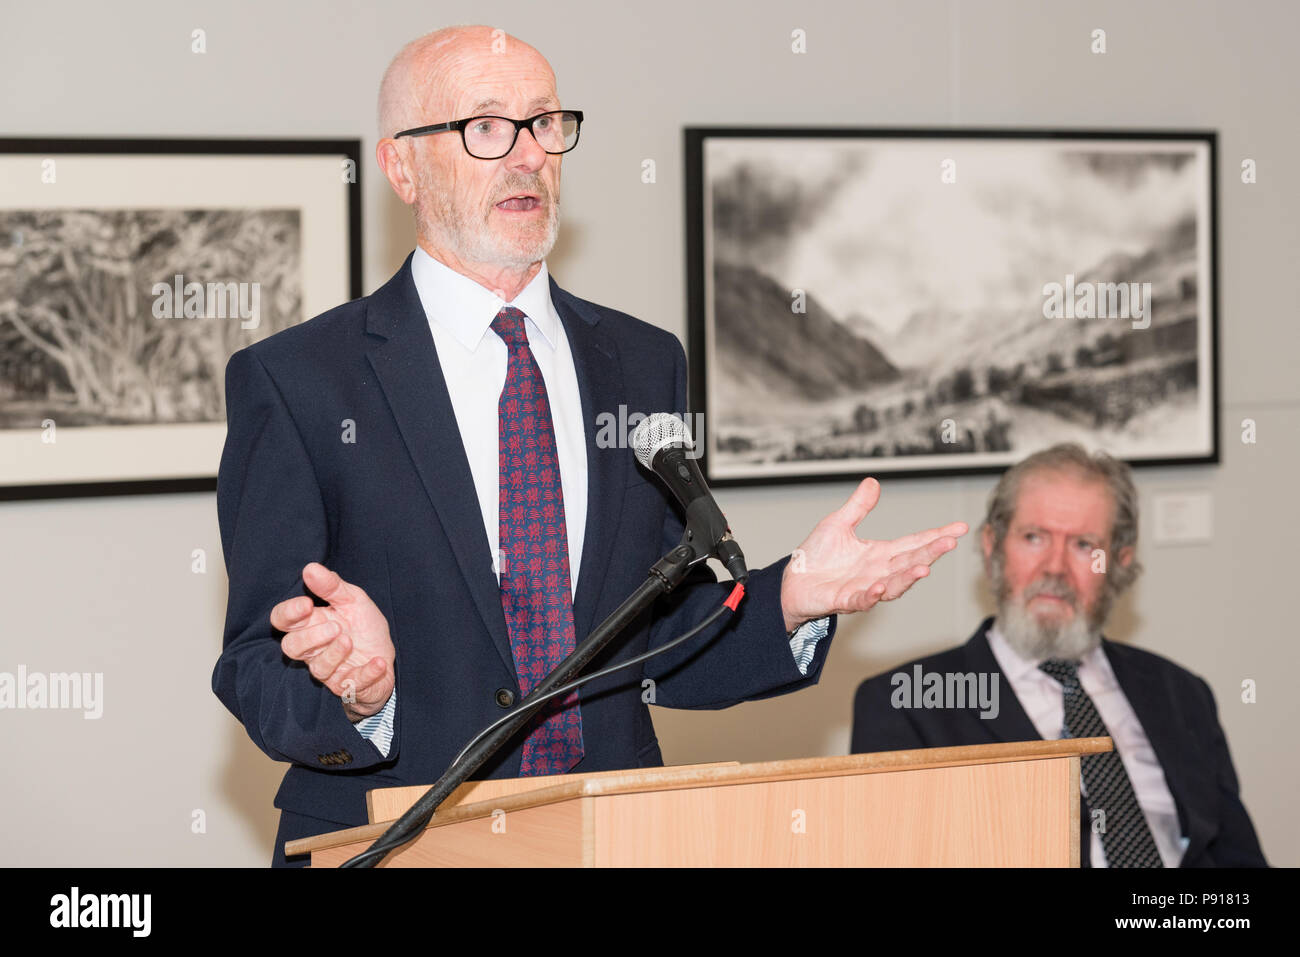 Oriel Môn, Llangefni, Gwynedd, Wales, UK. Friday 13 July 2018. The Opening night and prize awards for the centenary and fourth Kyffin Williams Drawing Prize exhibition, sponsored by ITV Cymru Wales and Rogers Jones auctioneers, was held at Oriel Môn, with David Rogers Jones (L) speaking about the student prize that his company of auctioneers sponsored, whilst David Meredith (R) looks on. Credit: Michael Gibson/Alamy Live News Stock Photo